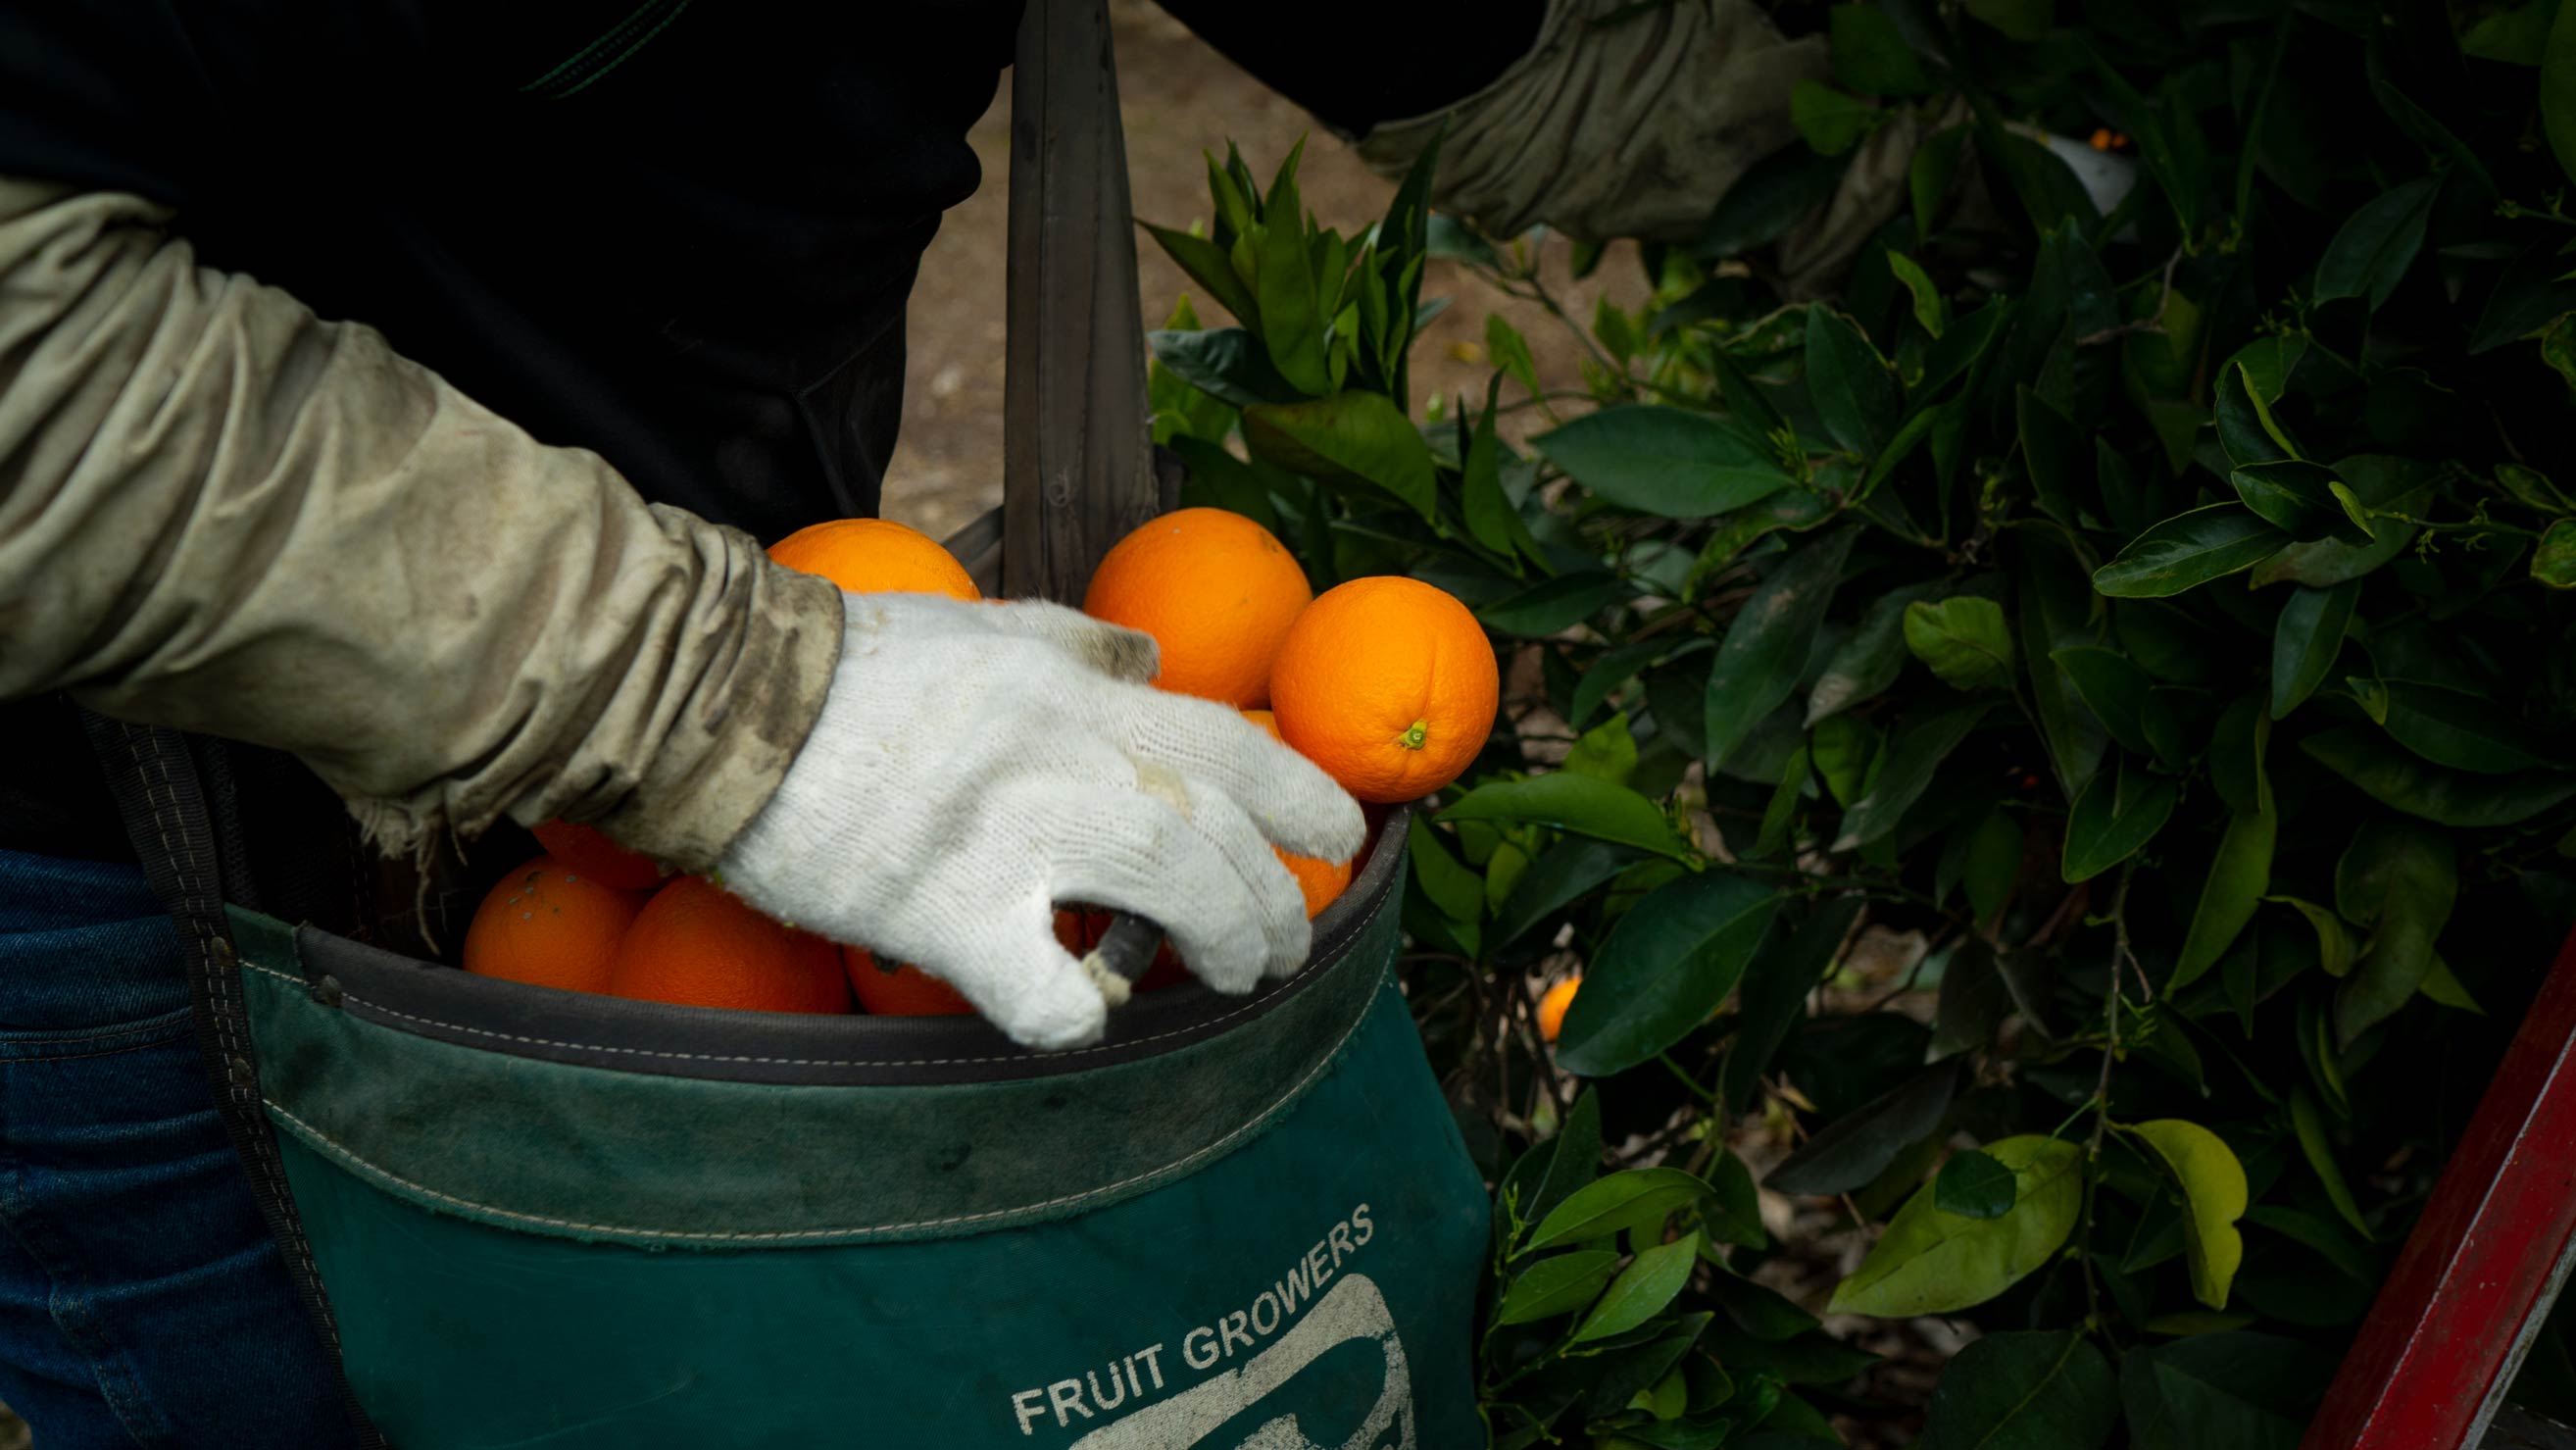 Fresh citrus, such as oranges and mandarins, cover the eastern portion of the Central Valley. California’s citrus industry has a total economic impact of $7.1 billion according to the Citrus Research Board. (Joe Proudman/UC Davis)